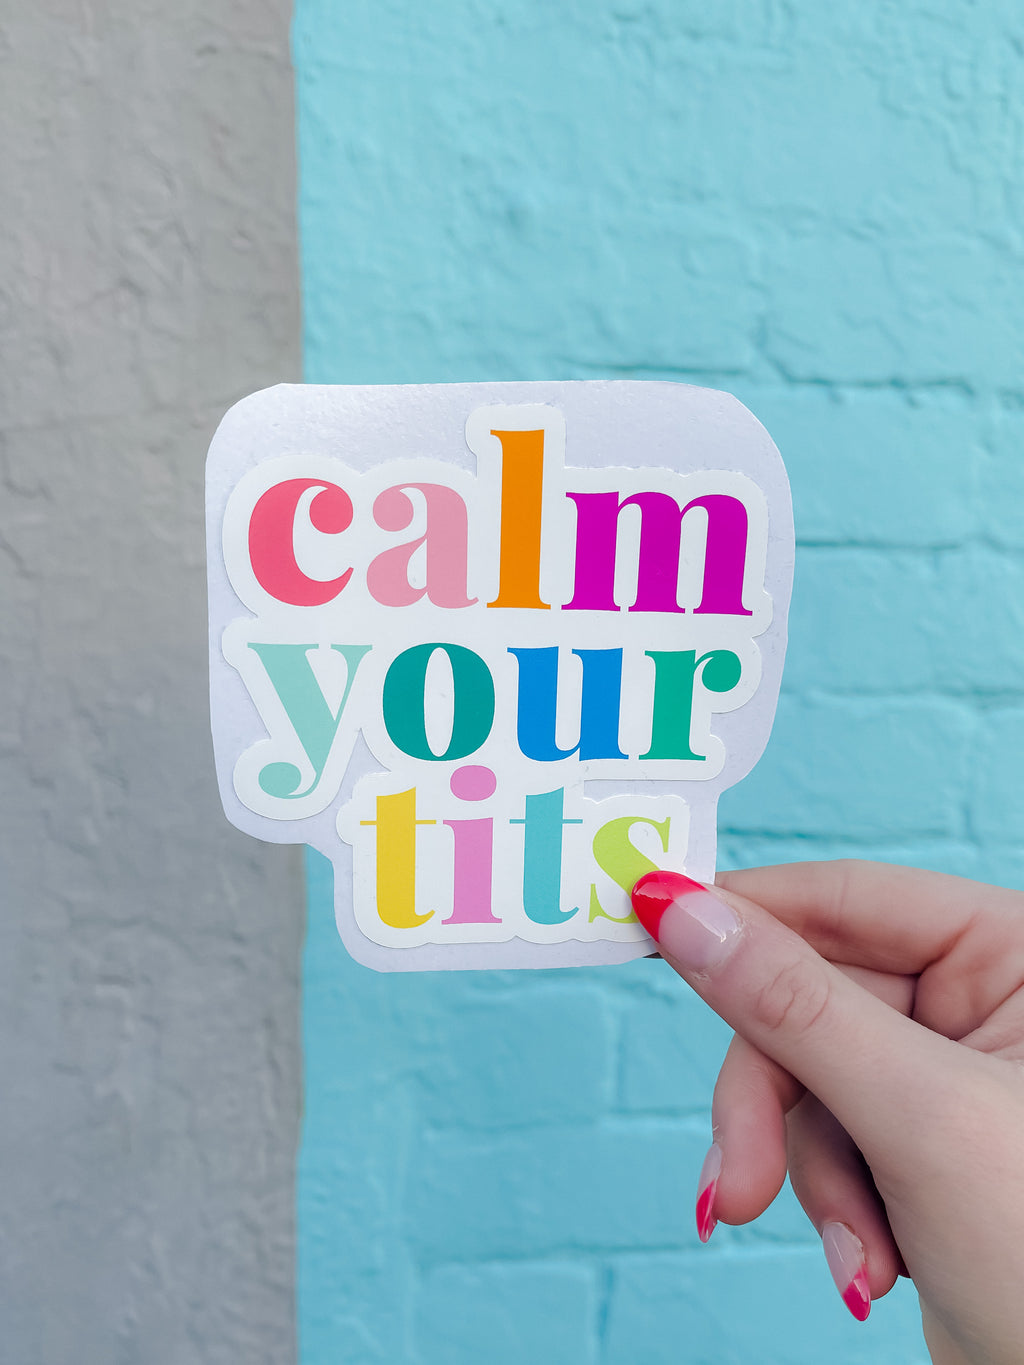 Calm Your Tits  Design approx. 4"-L x 4"-W  Durable Laminate Vinyl  Laminate vinyl is weatherproof and protects from rain and sunlight, as well as scratching  Put these vinyl stickers on drinkware, laptops, notebooks, etc!